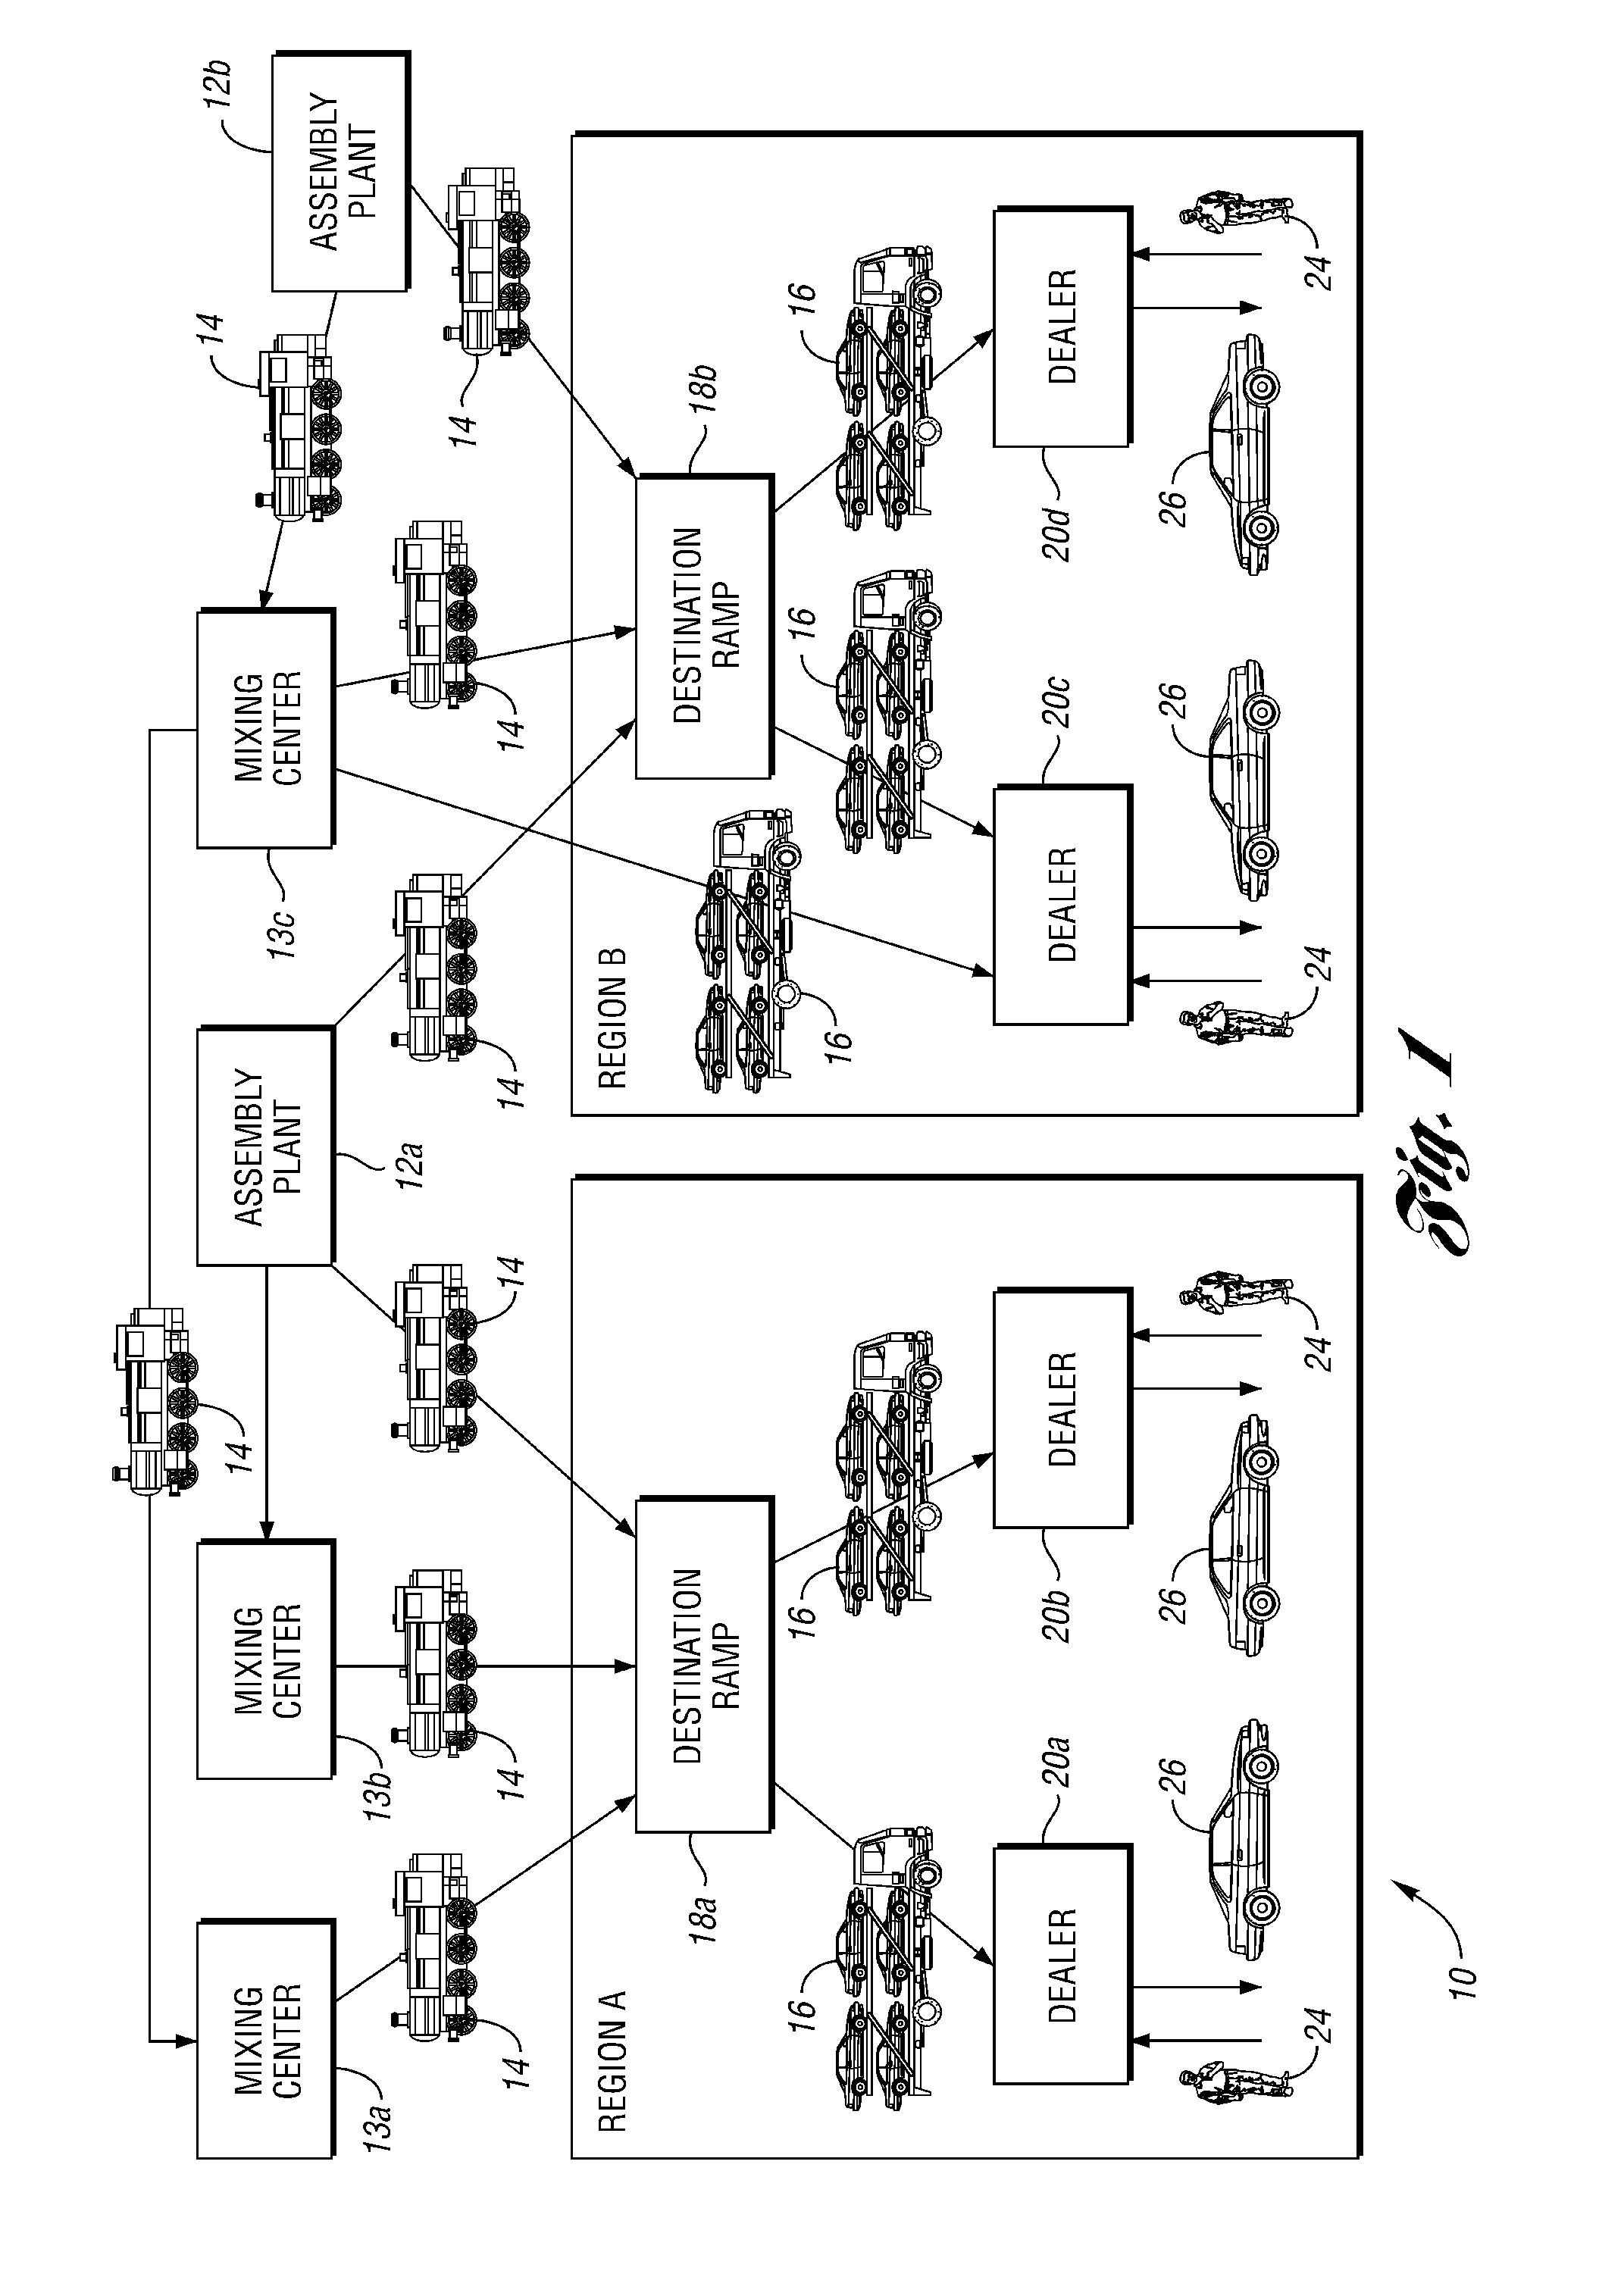 Electronic method and system for monitoring distribution facilities